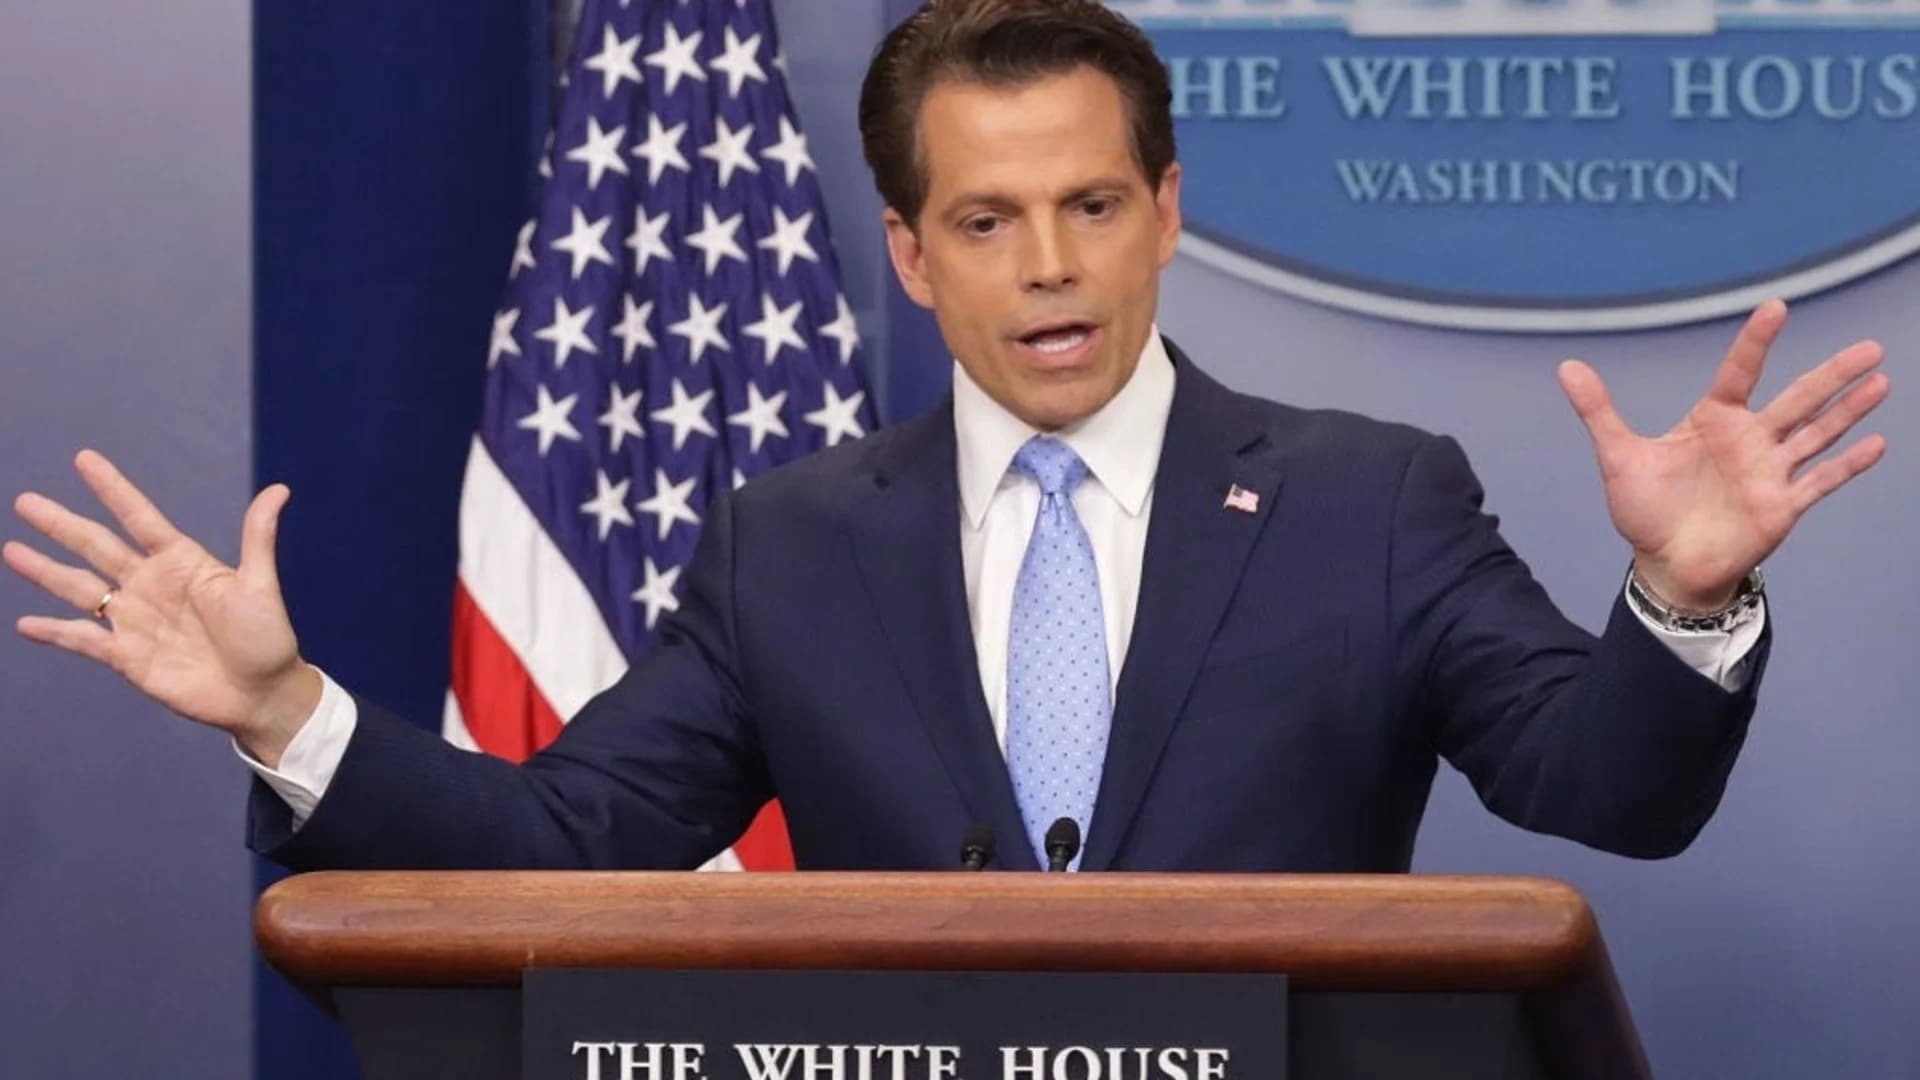 Copy-Scaramucci out of White House job as John Kelly takes charge